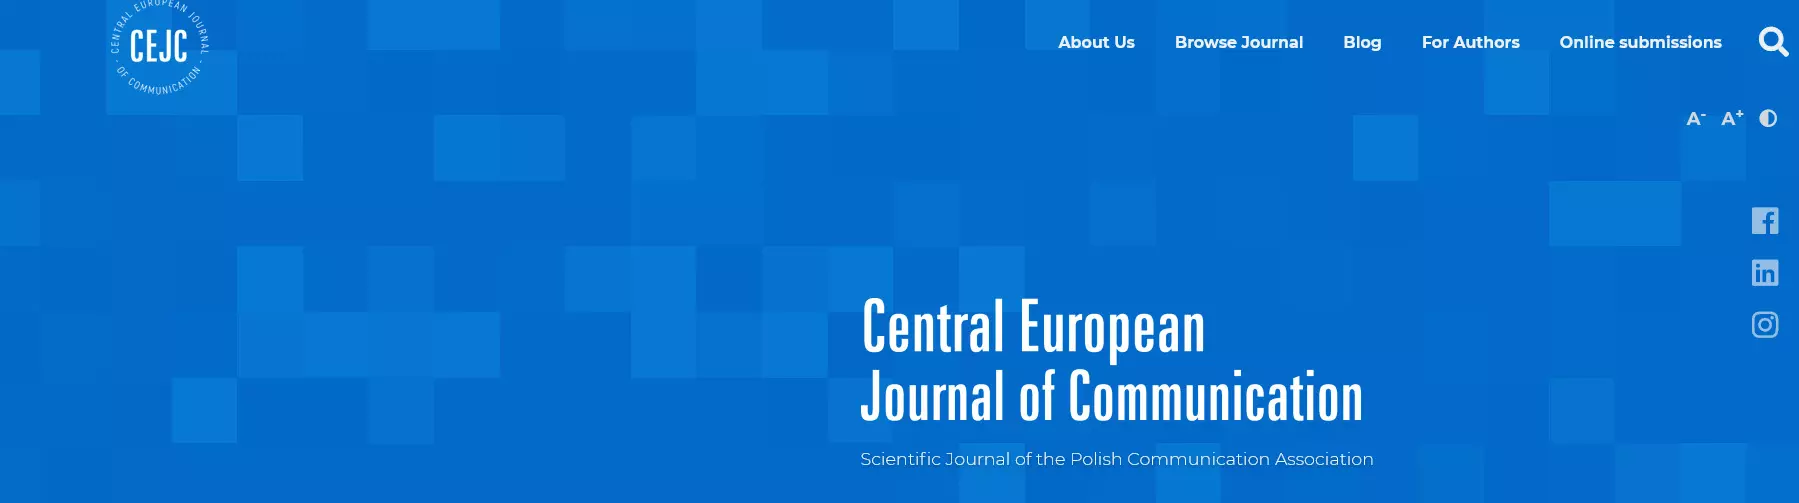 Central European Journal of Communication - two new issues and cfp